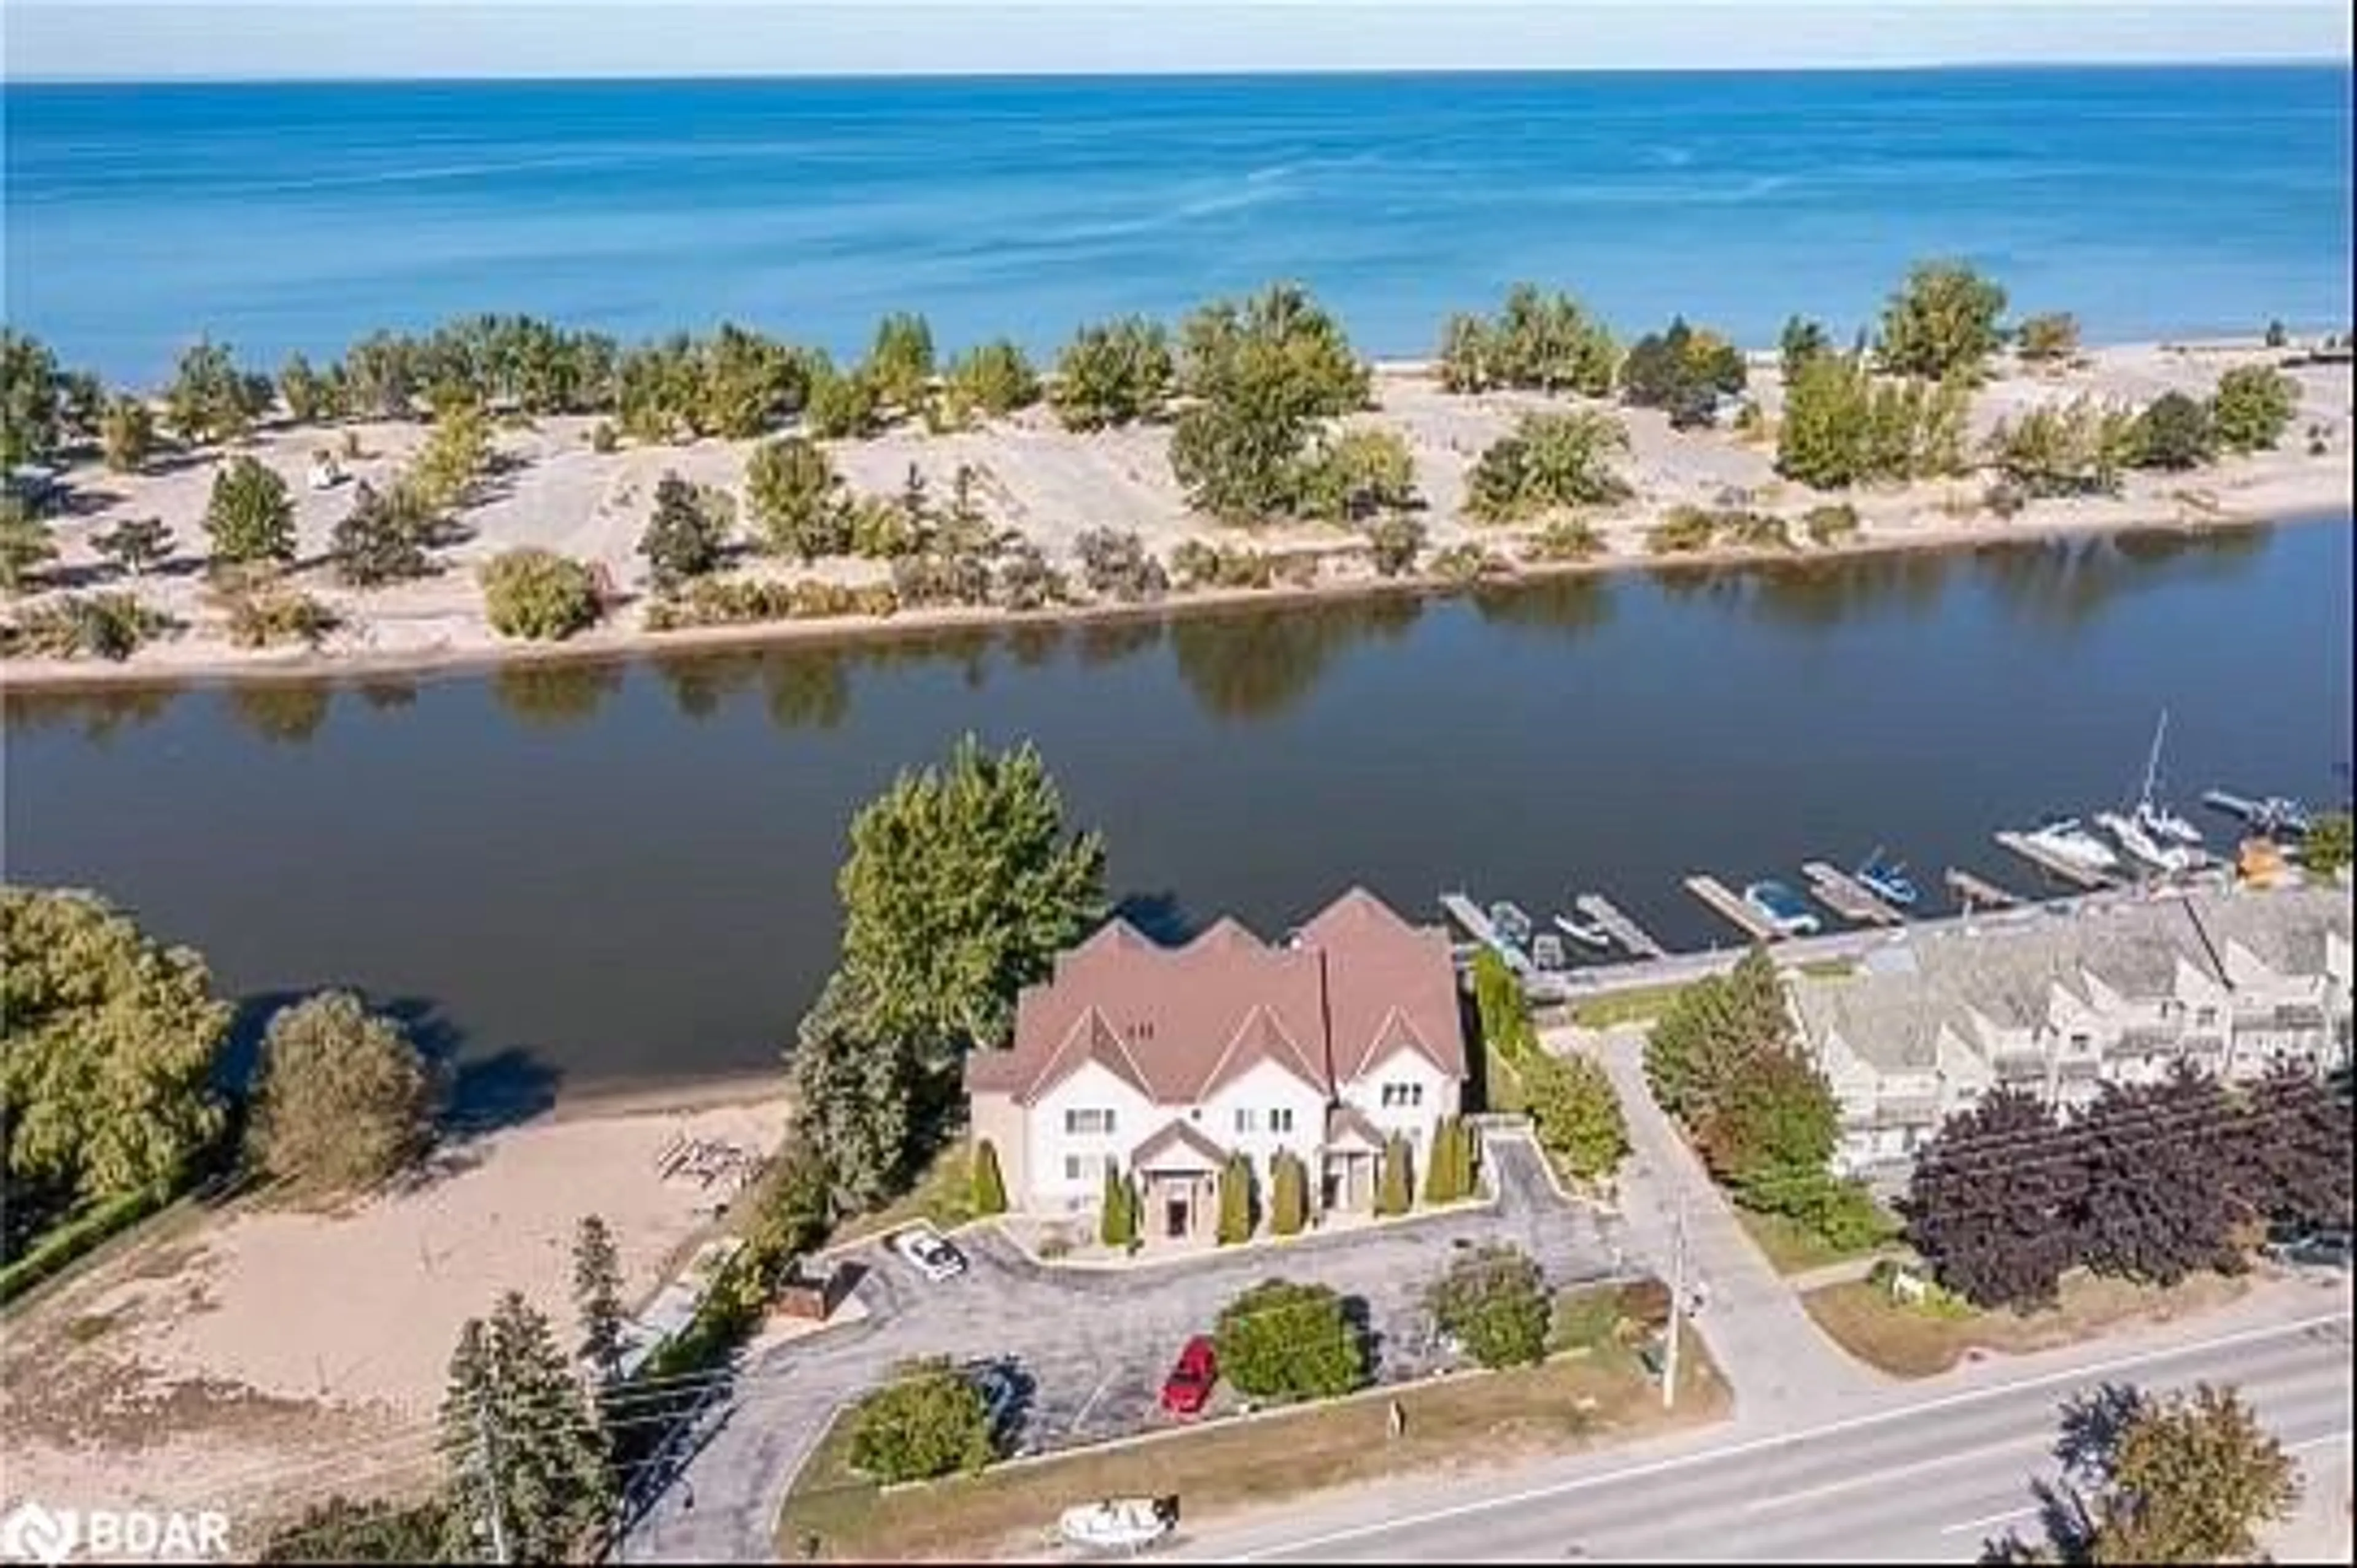 Lakeview for 194 River Rd #1B, Wasaga Beach Ontario L9Z 2L6